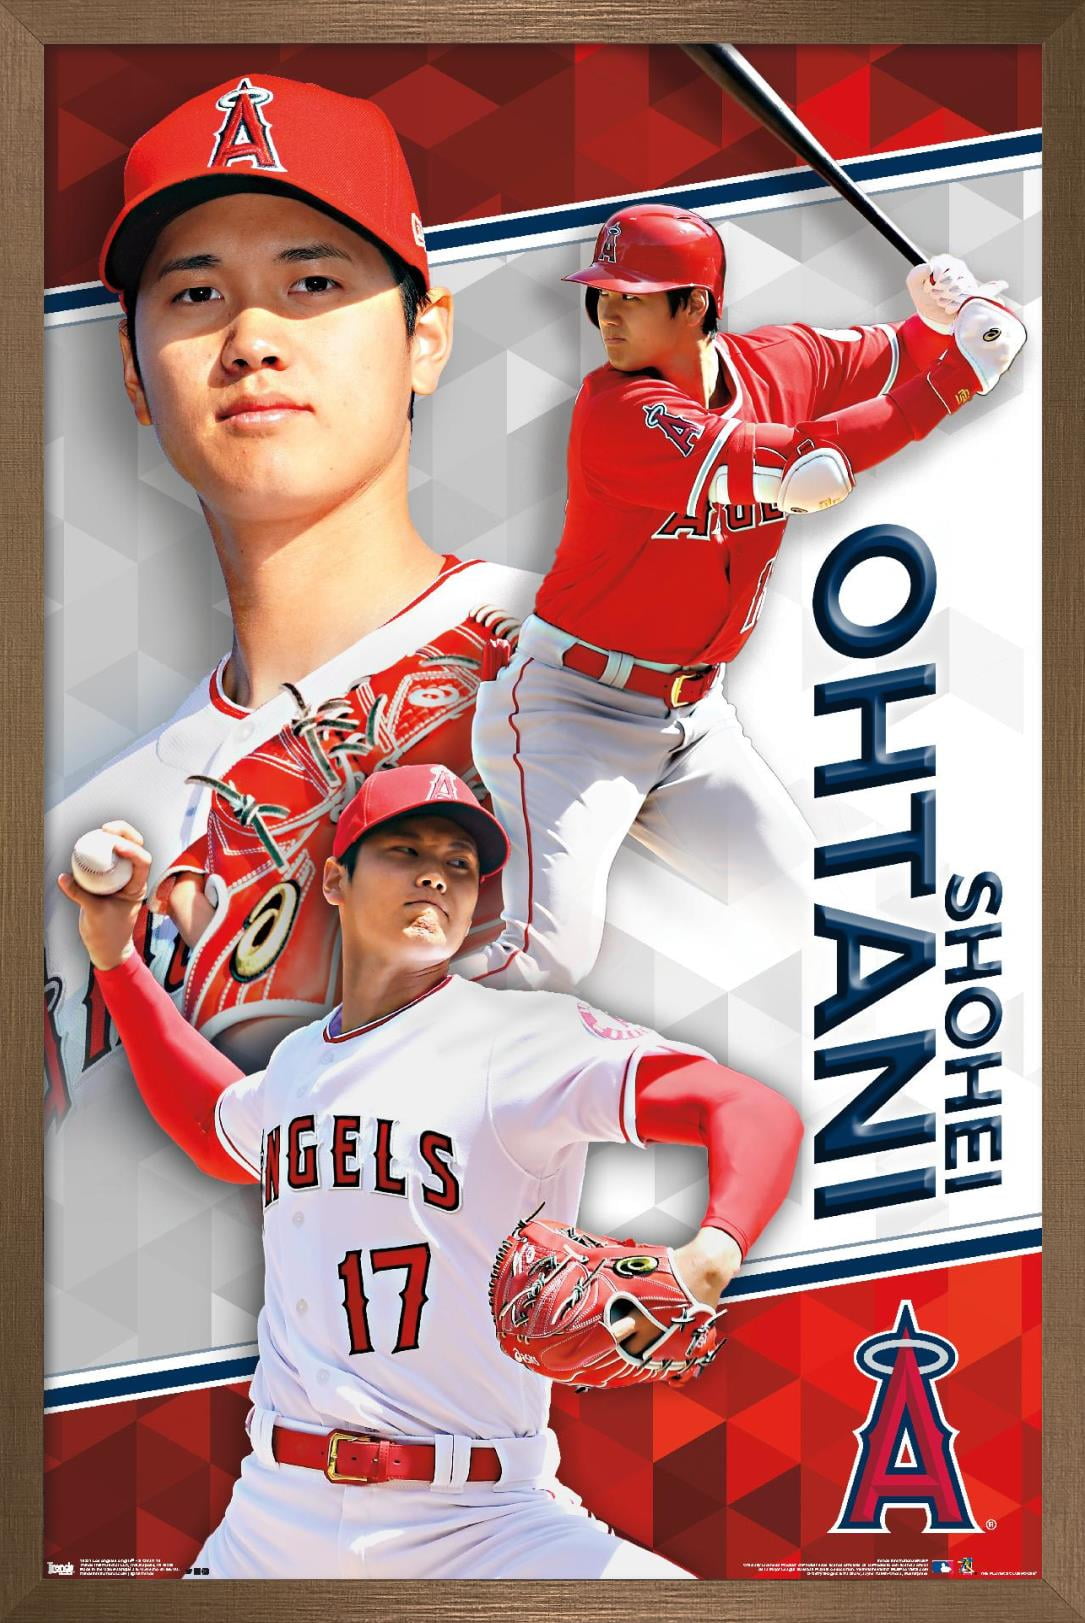 Ohtani (Shohei Ohtani) Los Angeles Angels - Officially Licensed MLB Print